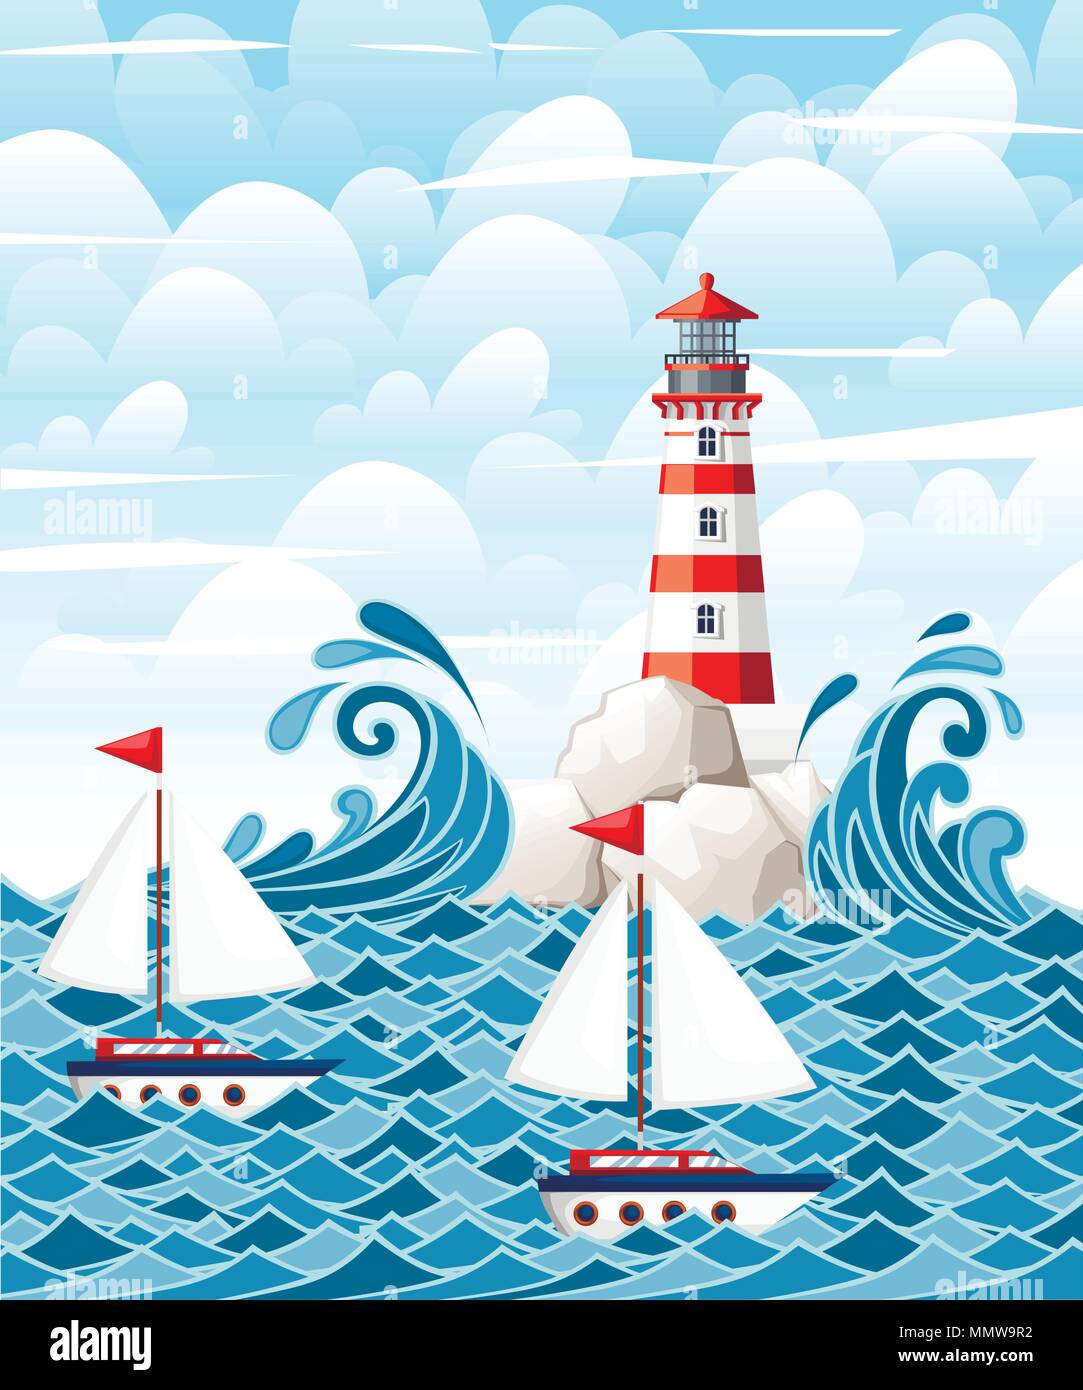 Stormy sea with lighthouse on rock stones island. Small ships on water. Nature or marine design. Flat style. Vector illustration with sky and clouds b Stock Vector